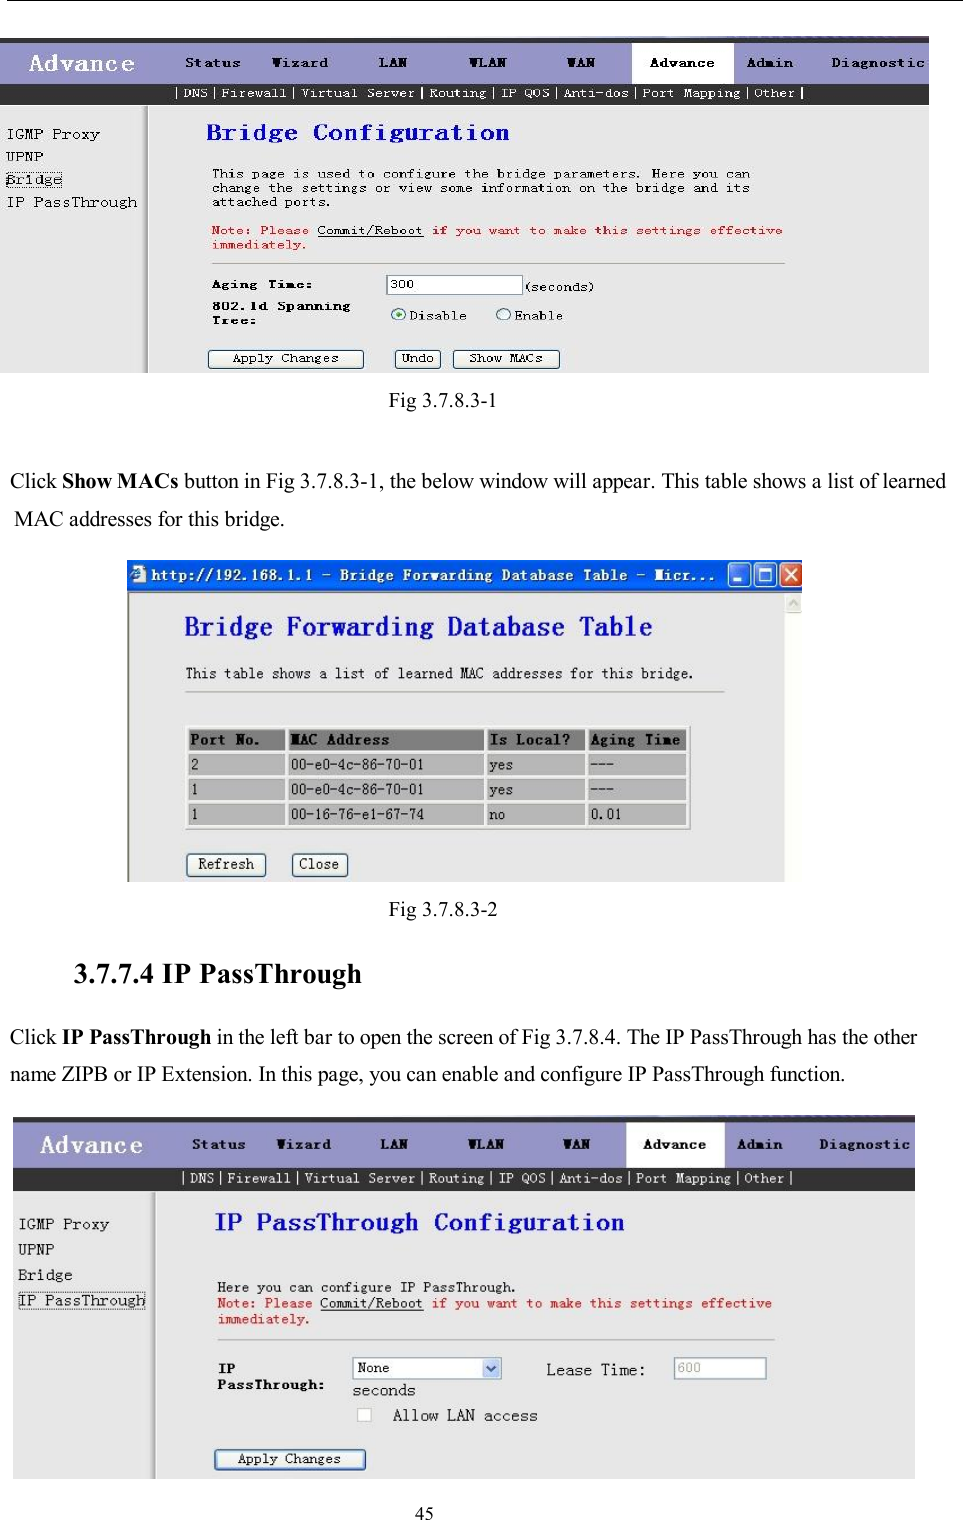                                                                     45  Fig 3.7.8.3-1  Click Show MACs button in Fig 3.7.8.3-1, the below window will appear. This table shows a list of learned MAC addresses for this bridge.  Fig 3.7.8.3-2  3.7.7.4 IP PassThrough Click IP PassThrough in the left bar to open the screen of Fig 3.7.8.4. The IP PassThrough has the other name ZIPB or IP Extension. In this page, you can enable and configure IP PassThrough function.  